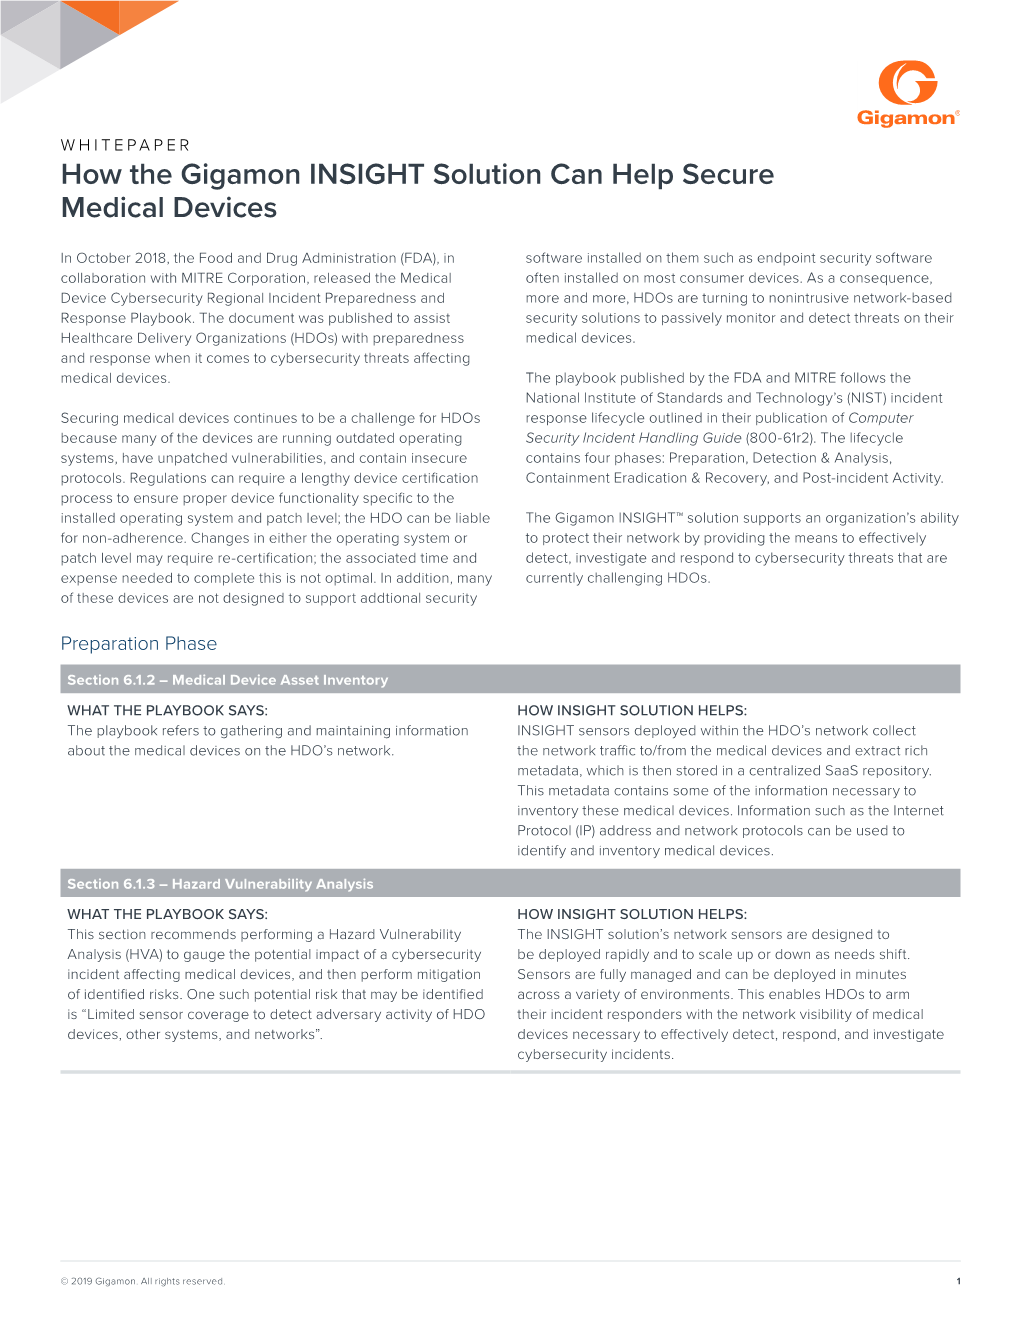 How the Gigamon INSIGHT Solution Can Help Secure Medical Devices